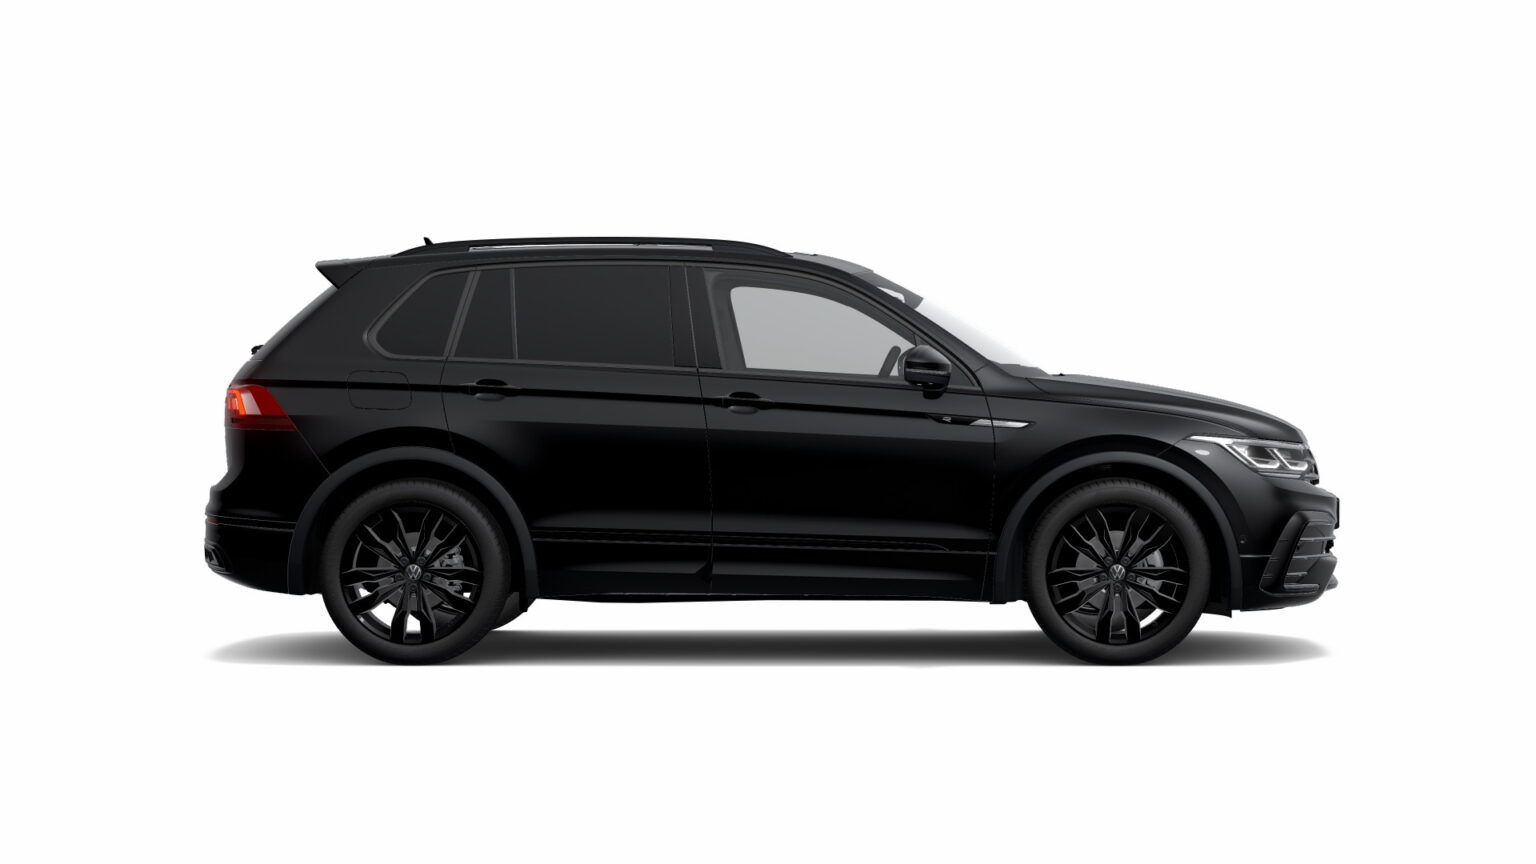 VW Tiguan Black Edition Is The New SinisterLooking Flagship Trim